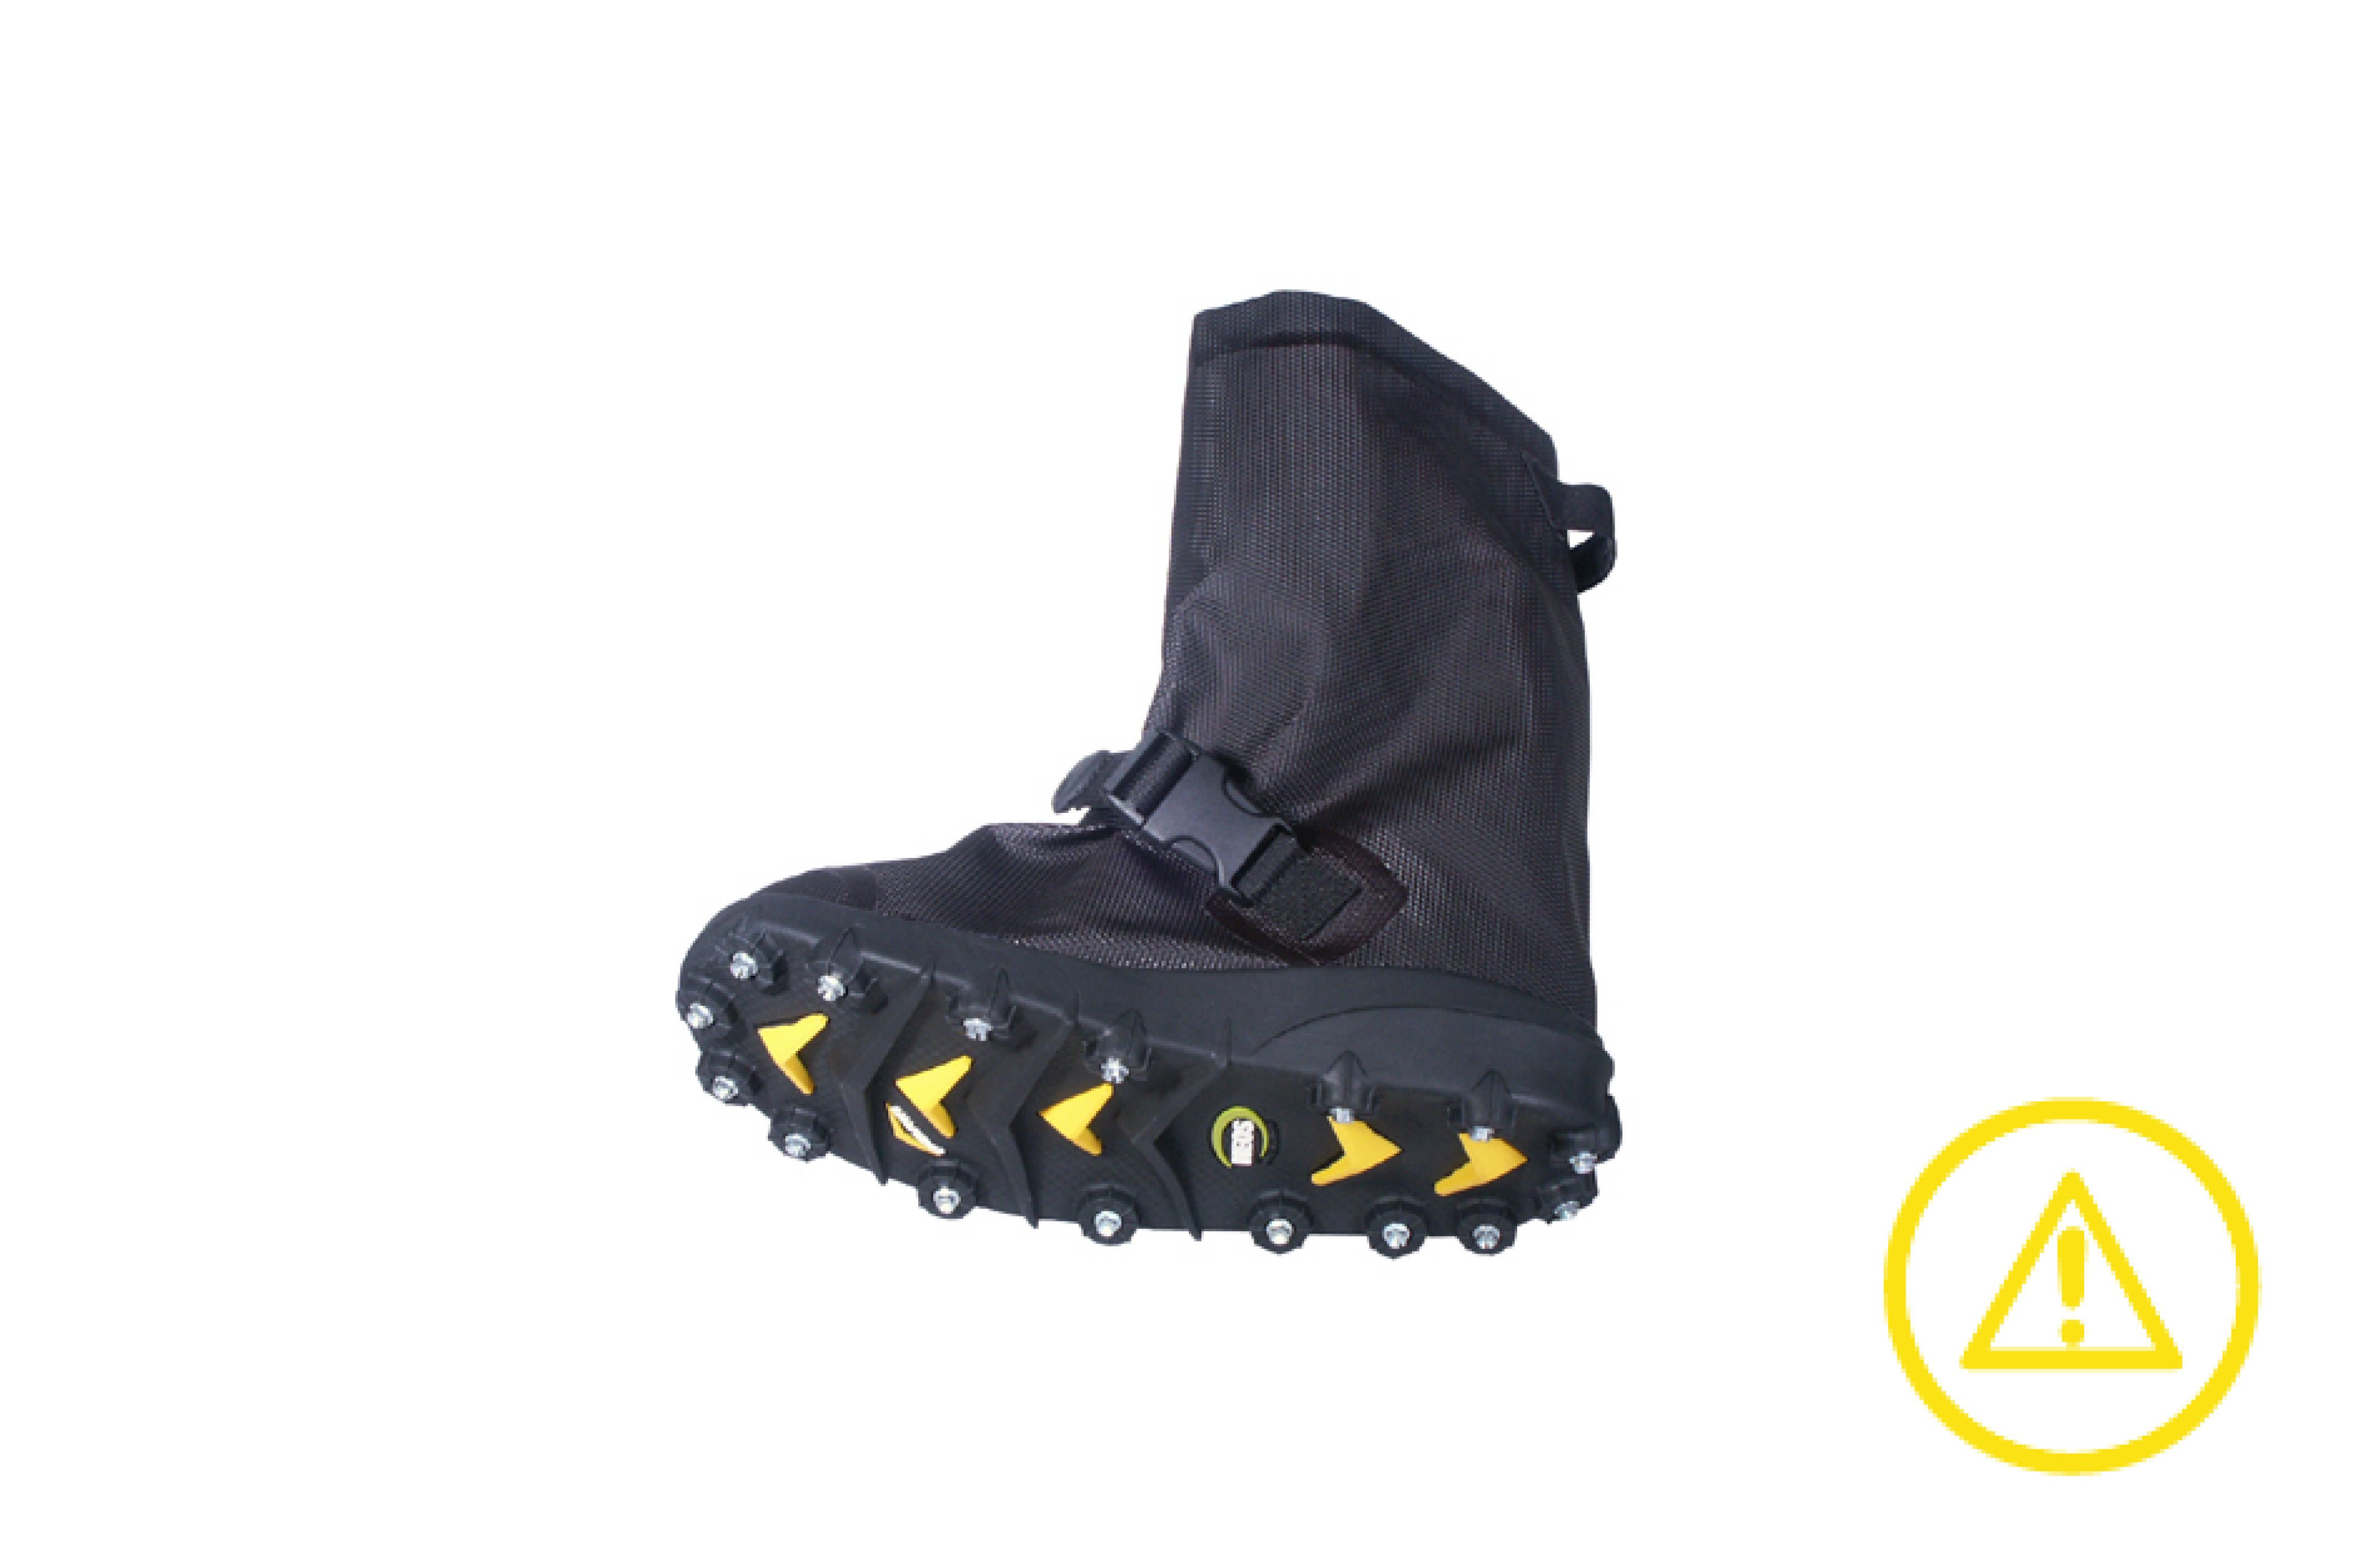 STABILicers™ Overshoes